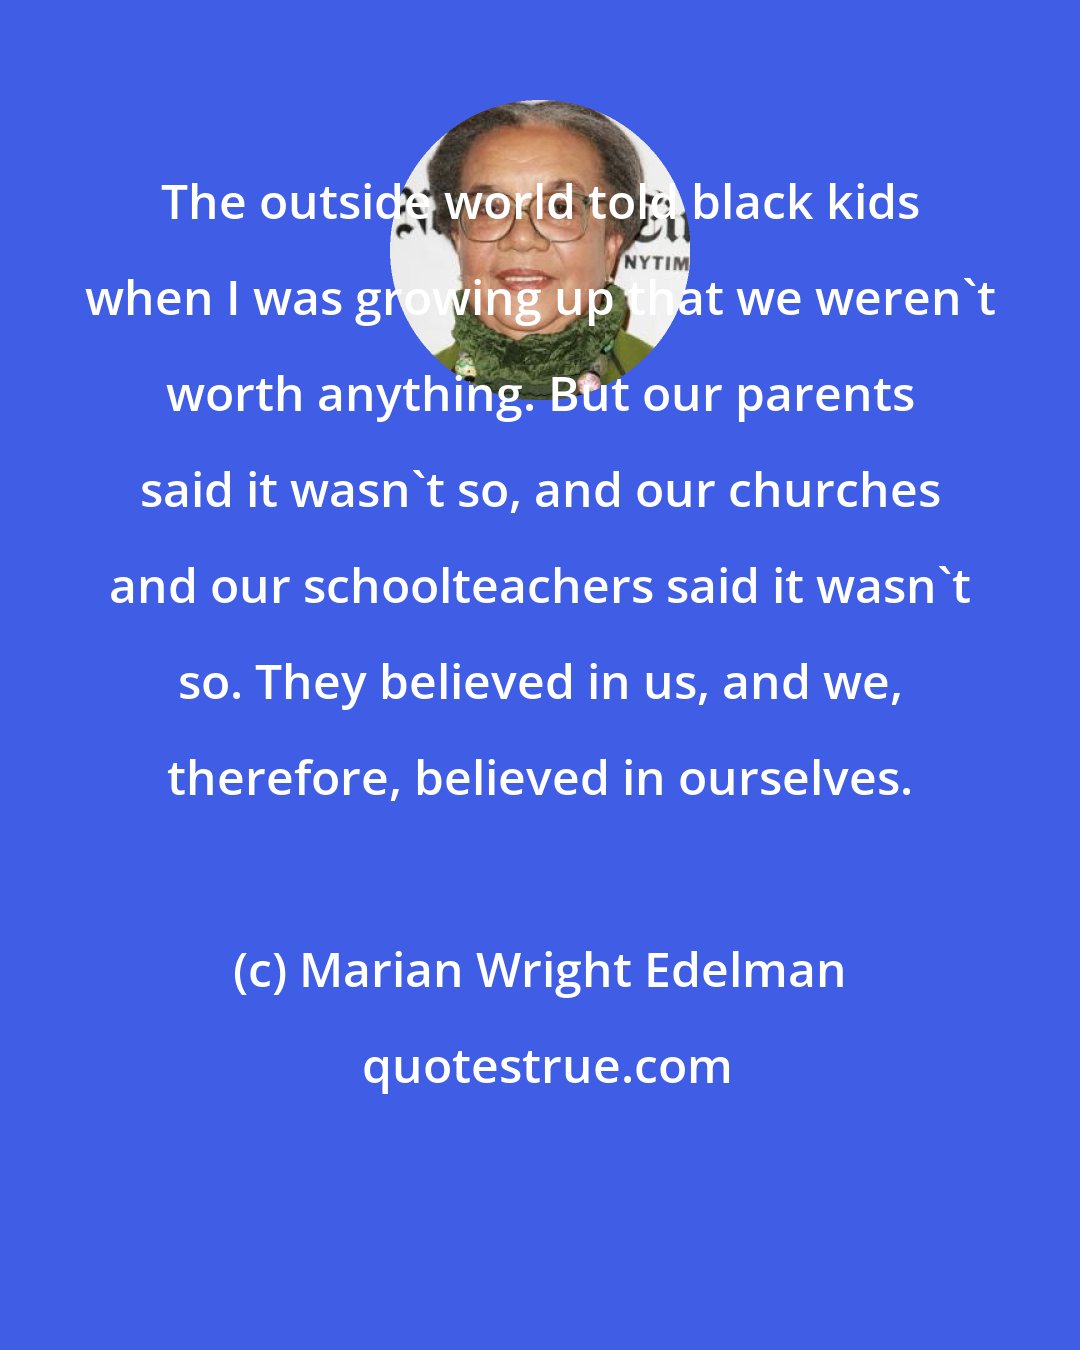 Marian Wright Edelman: The outside world told black kids when I was growing up that we weren't worth anything. But our parents said it wasn't so, and our churches and our schoolteachers said it wasn't so. They believed in us, and we, therefore, believed in ourselves.